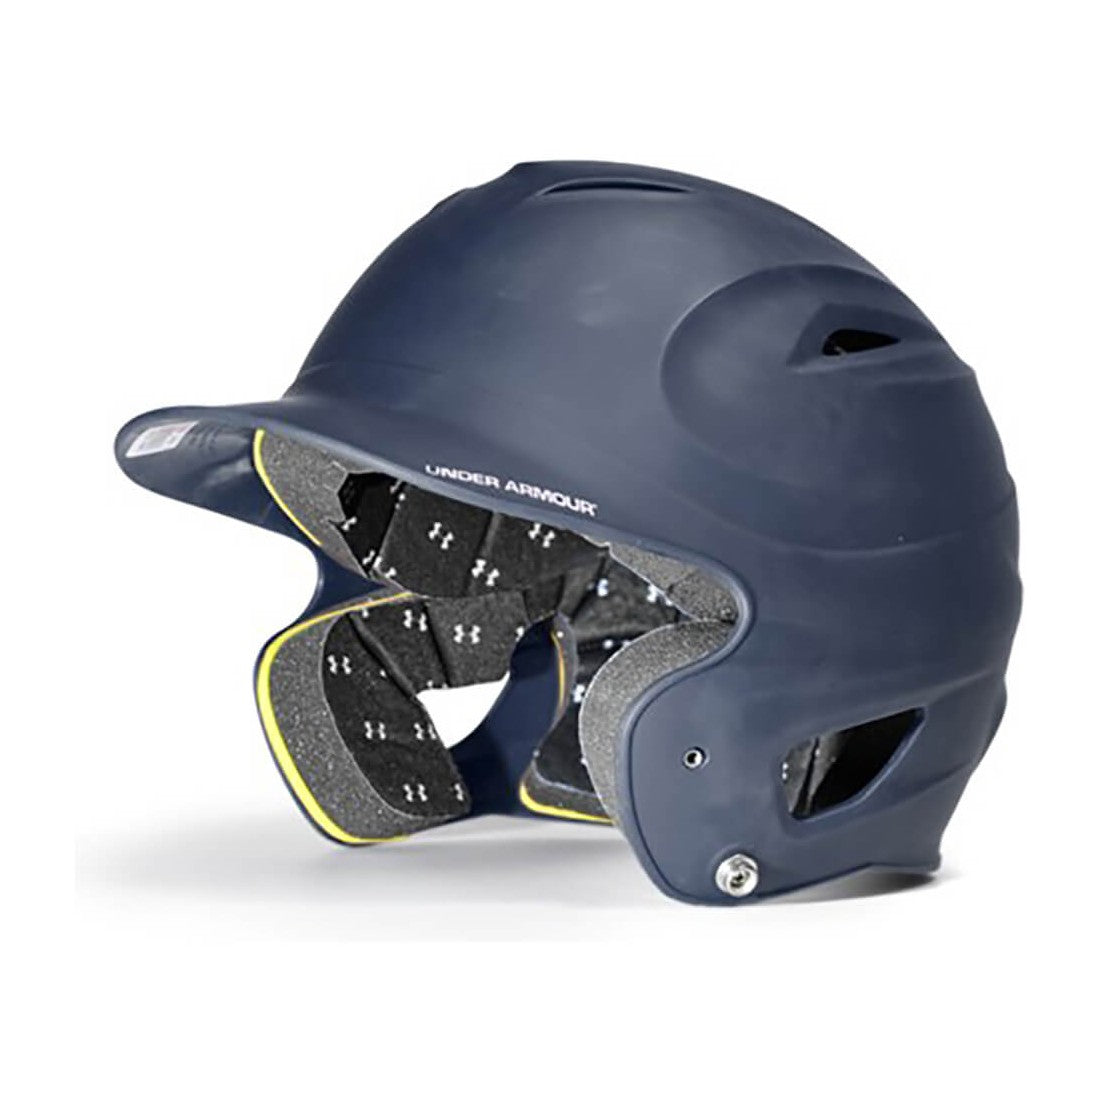 /under-armour-youth-matte-one-size-fits-all-batters-helmet-uabh-110m